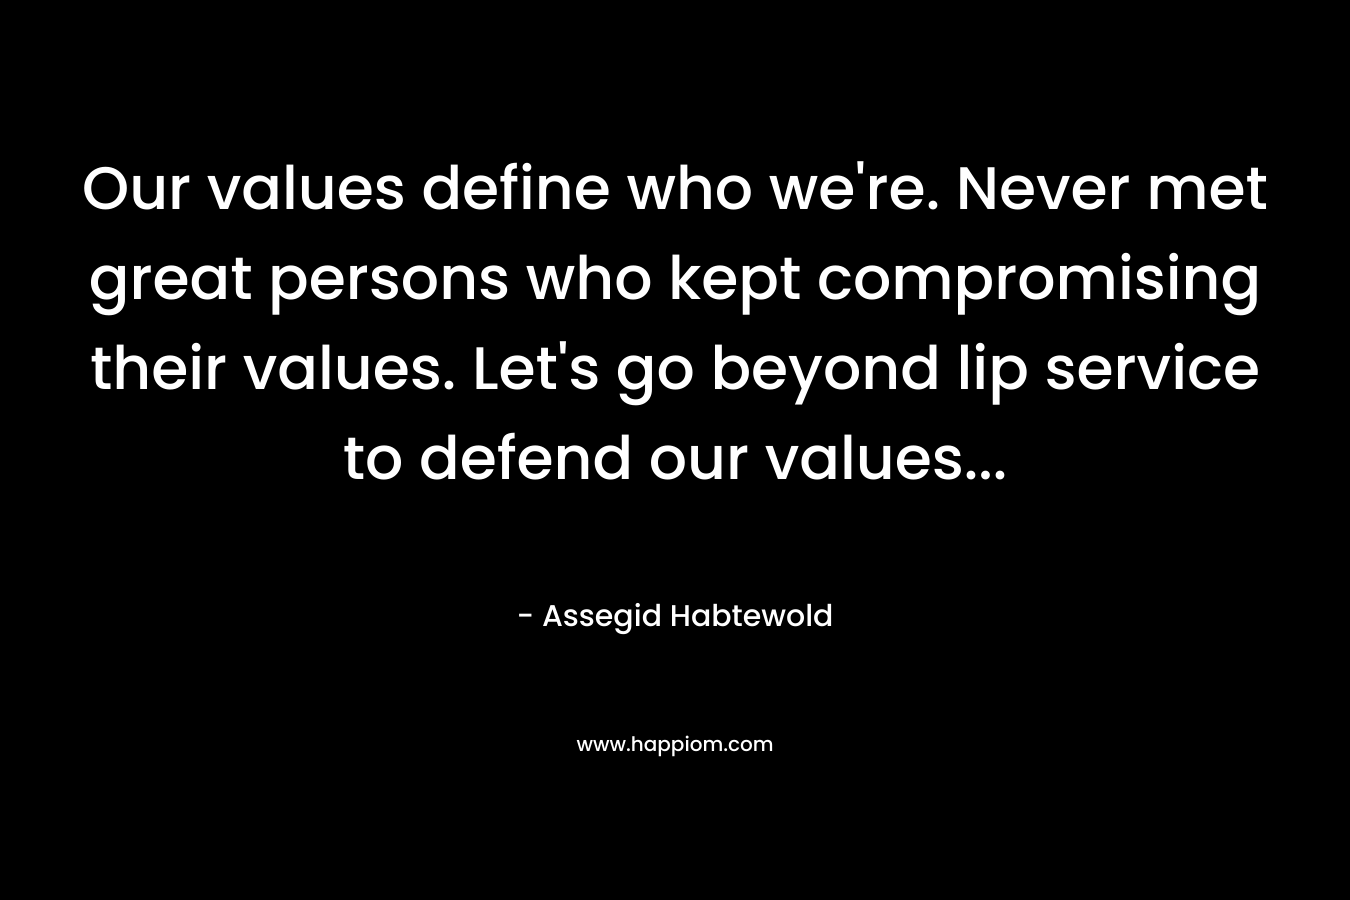 Our values define who we’re. Never met great persons who kept compromising their values. Let’s go beyond lip service to defend our values… – Assegid Habtewold